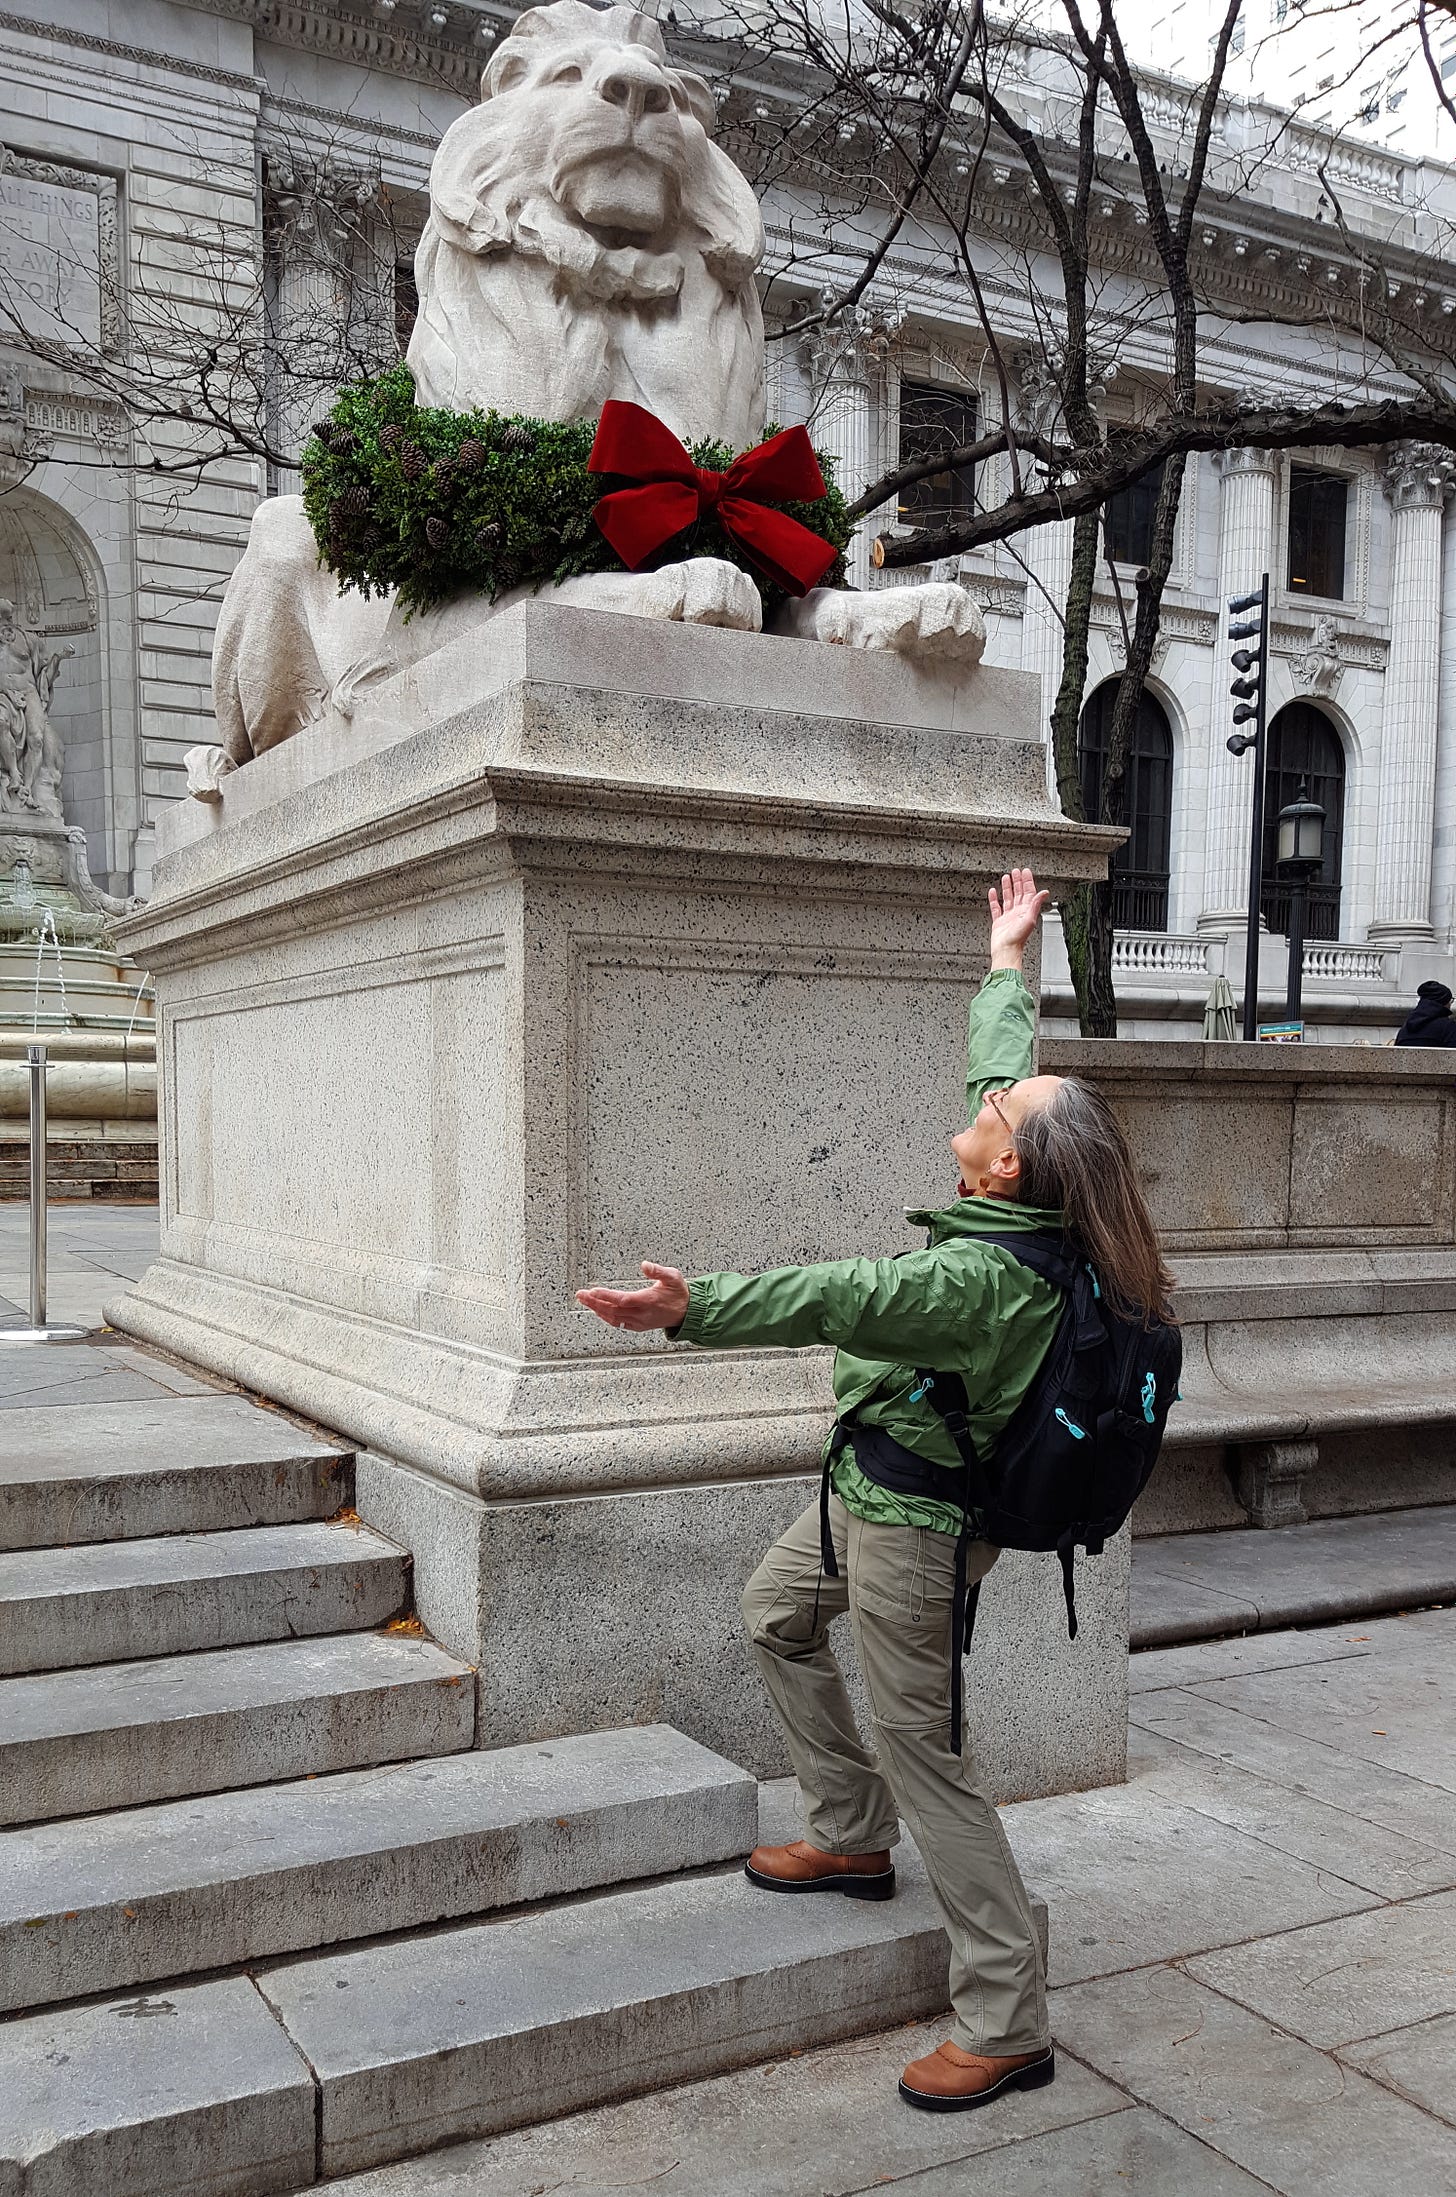 Jodi with long brown hair wearing cowboy boots, a green jacket and a backpack stands at the base of an iconic New York Public Library lion statue — her arms outstretched in homage.